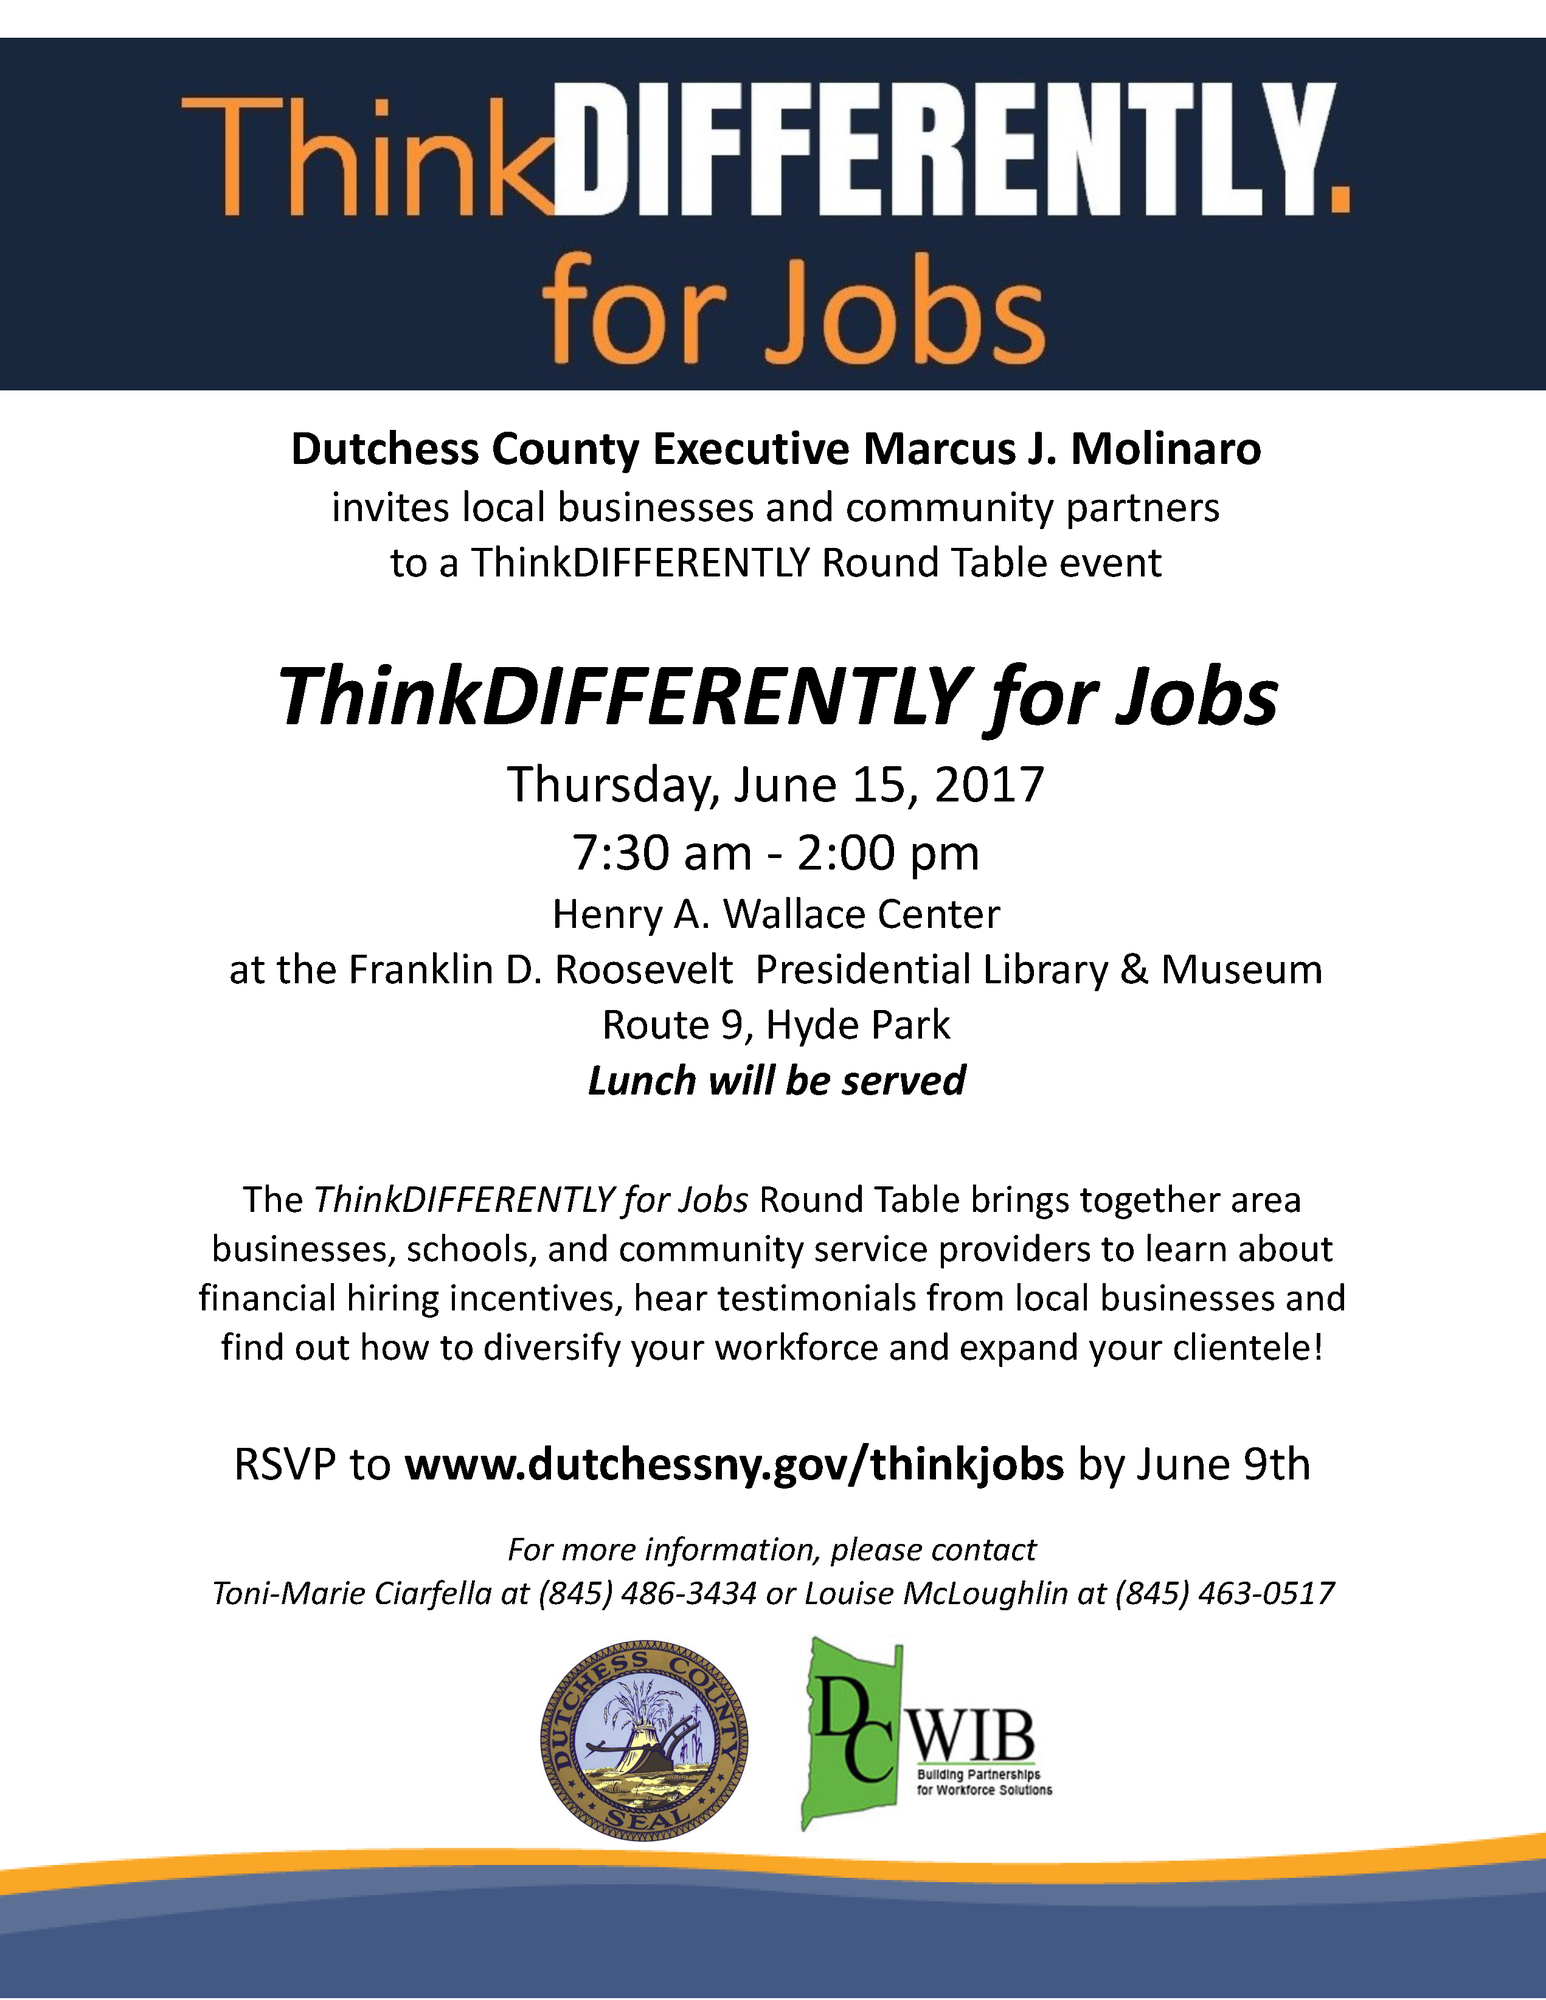 ThinkDIFFERENTLY for Jobs